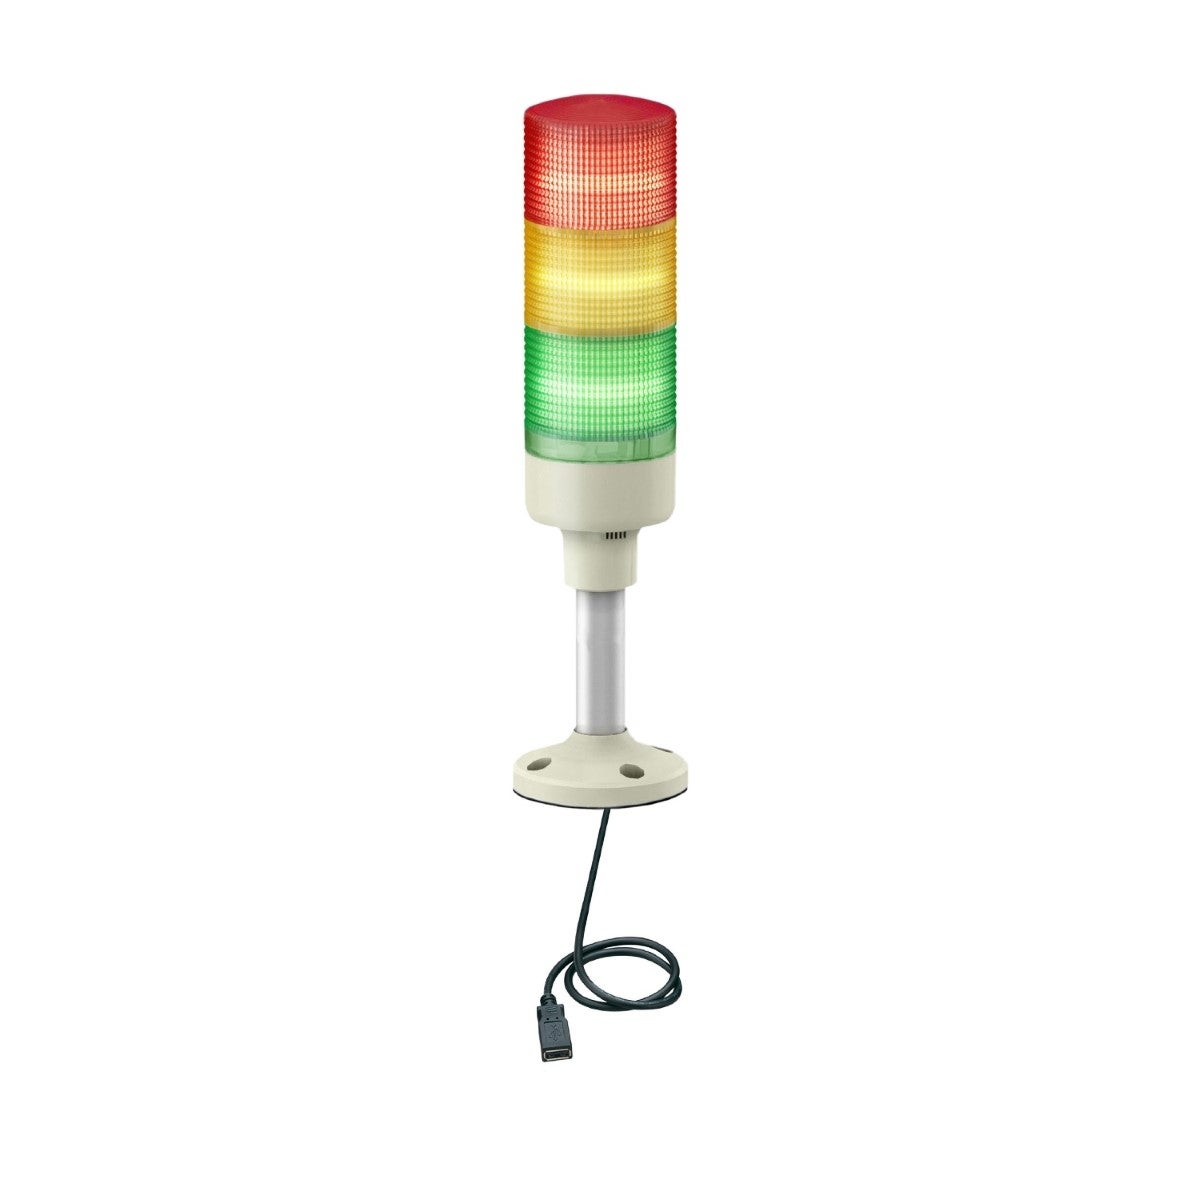 Multi-color USB Programmable tower lights -60mm- steady/flashing LED-buzzer